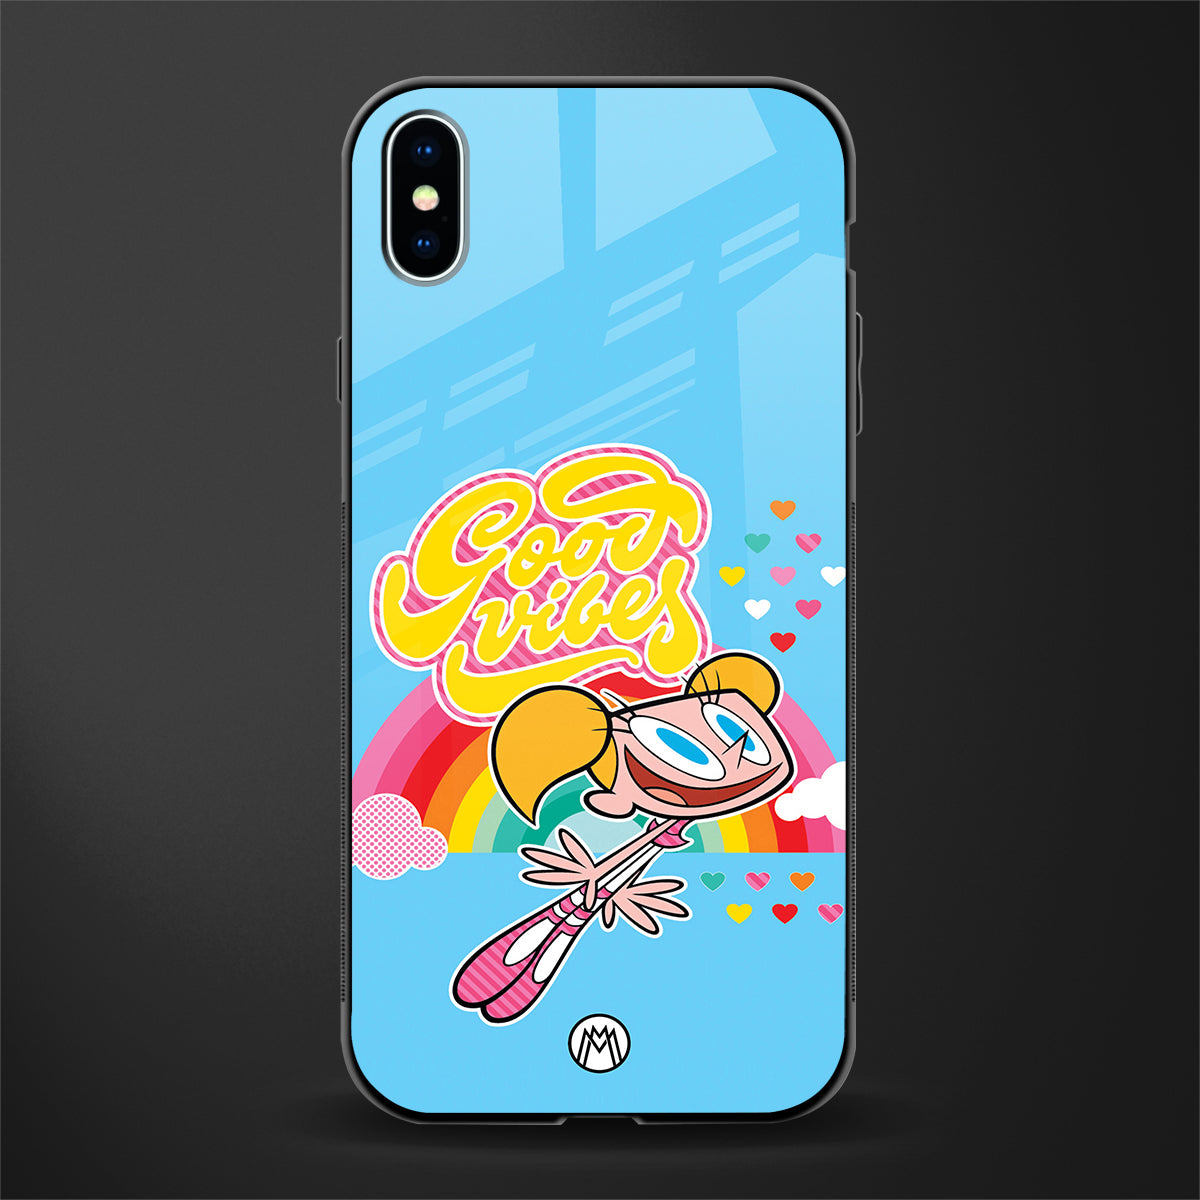 deedee good vibes glass case for iphone xs max image